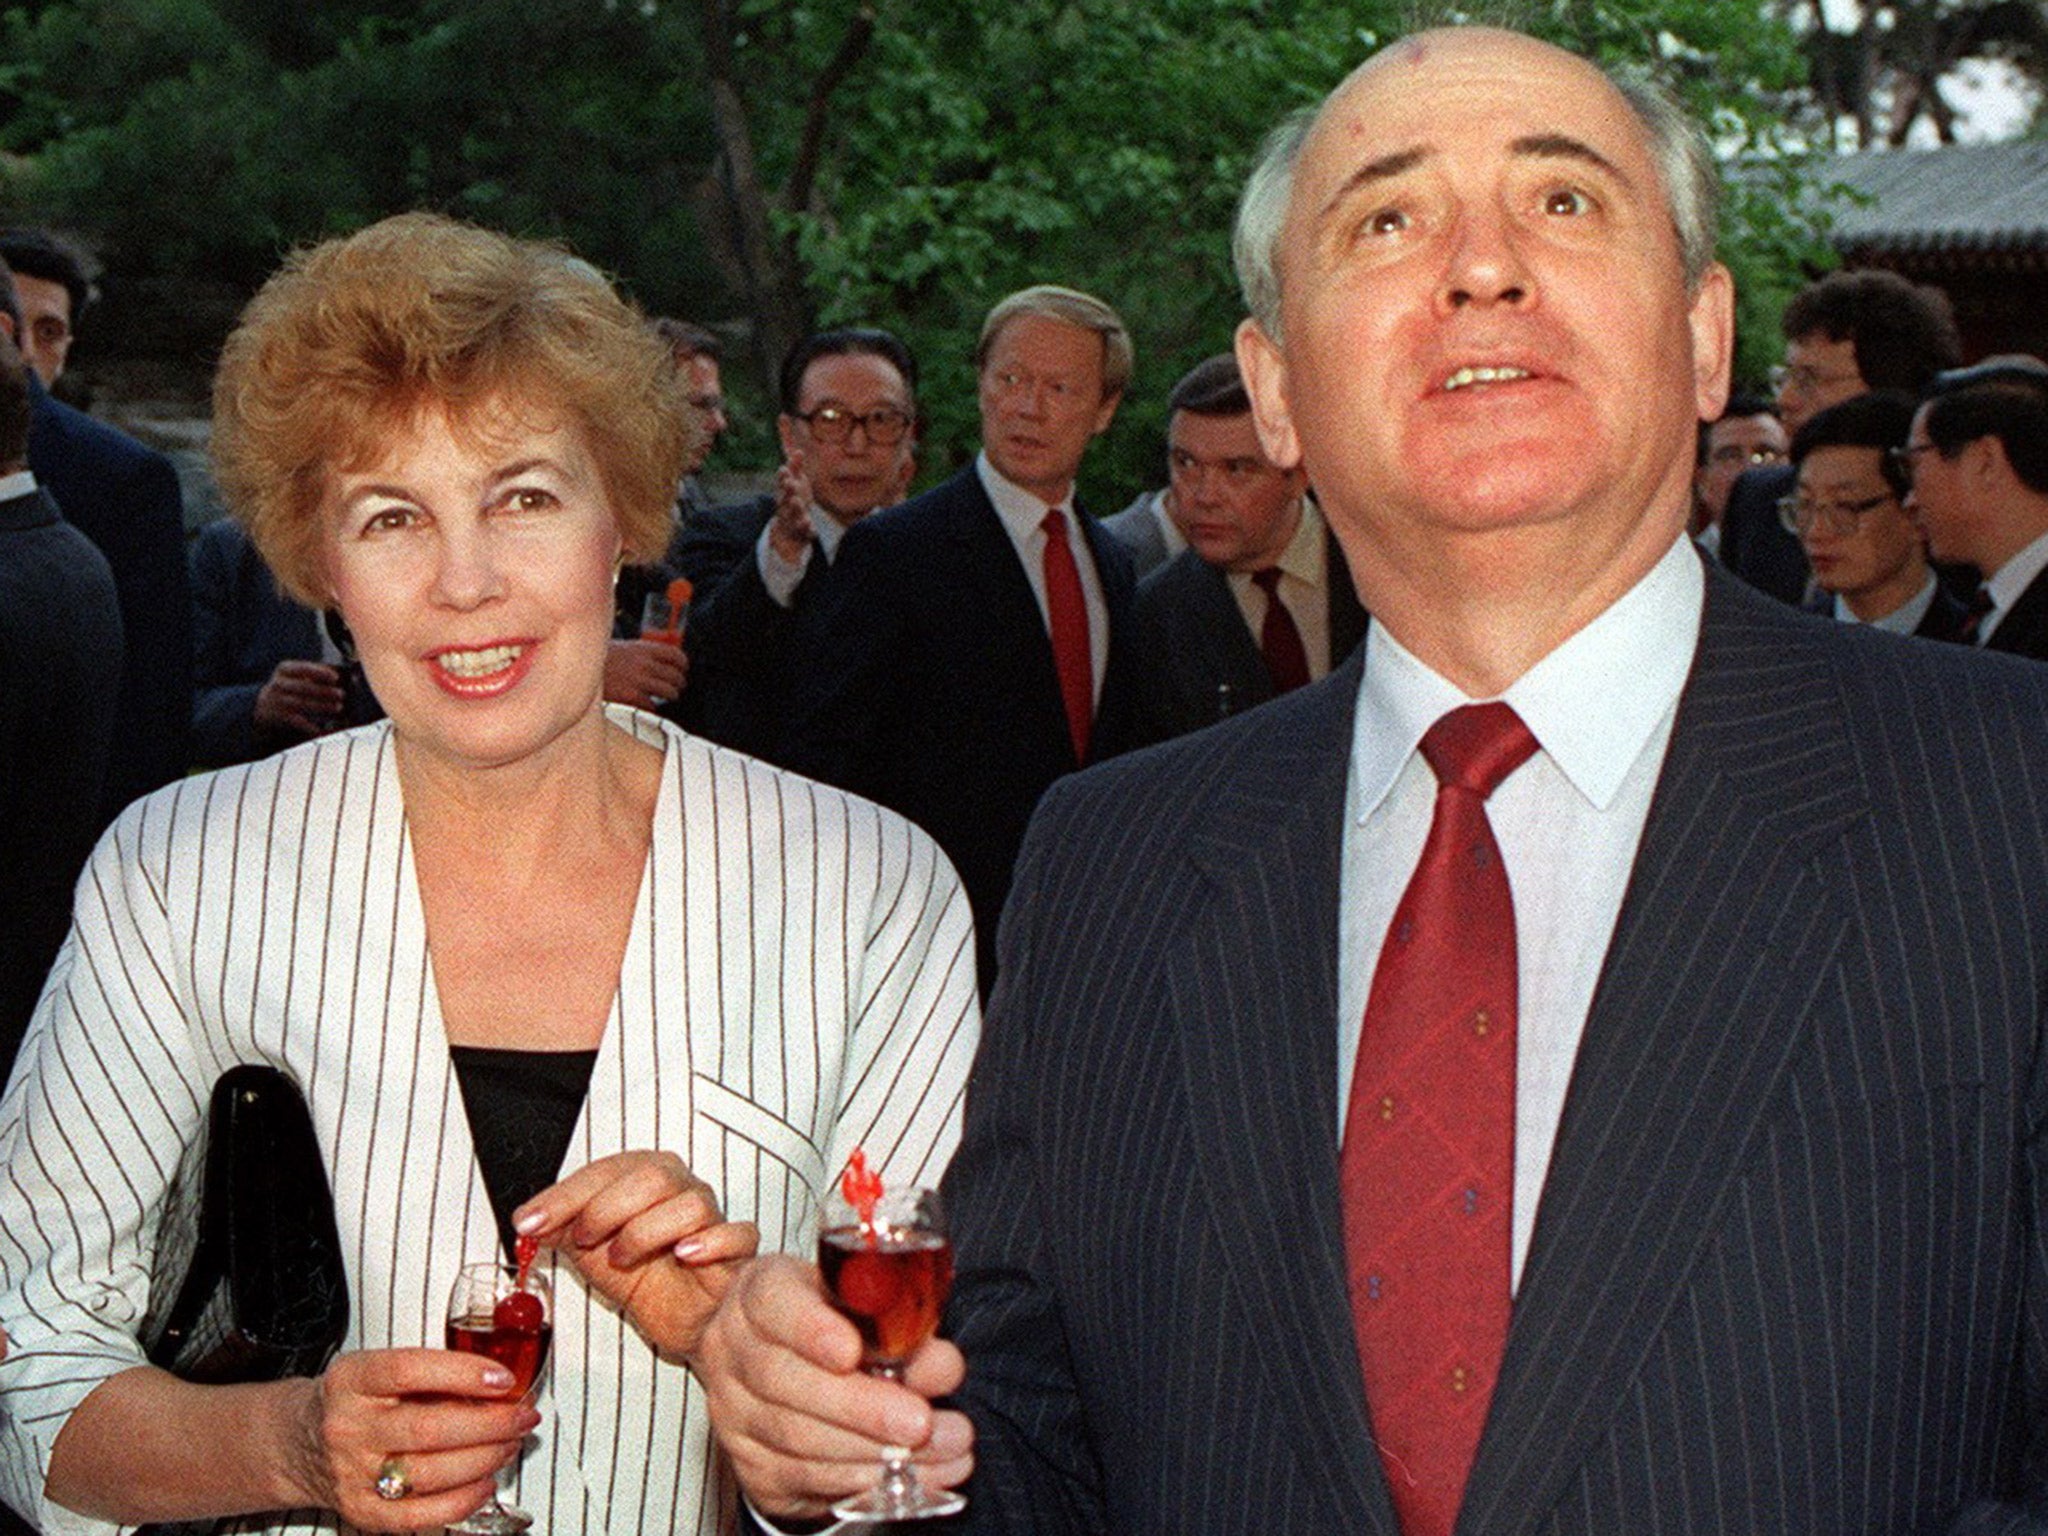 Mikhail Gorbachev with his wife Raisa, during a visit to Beijing in 1989